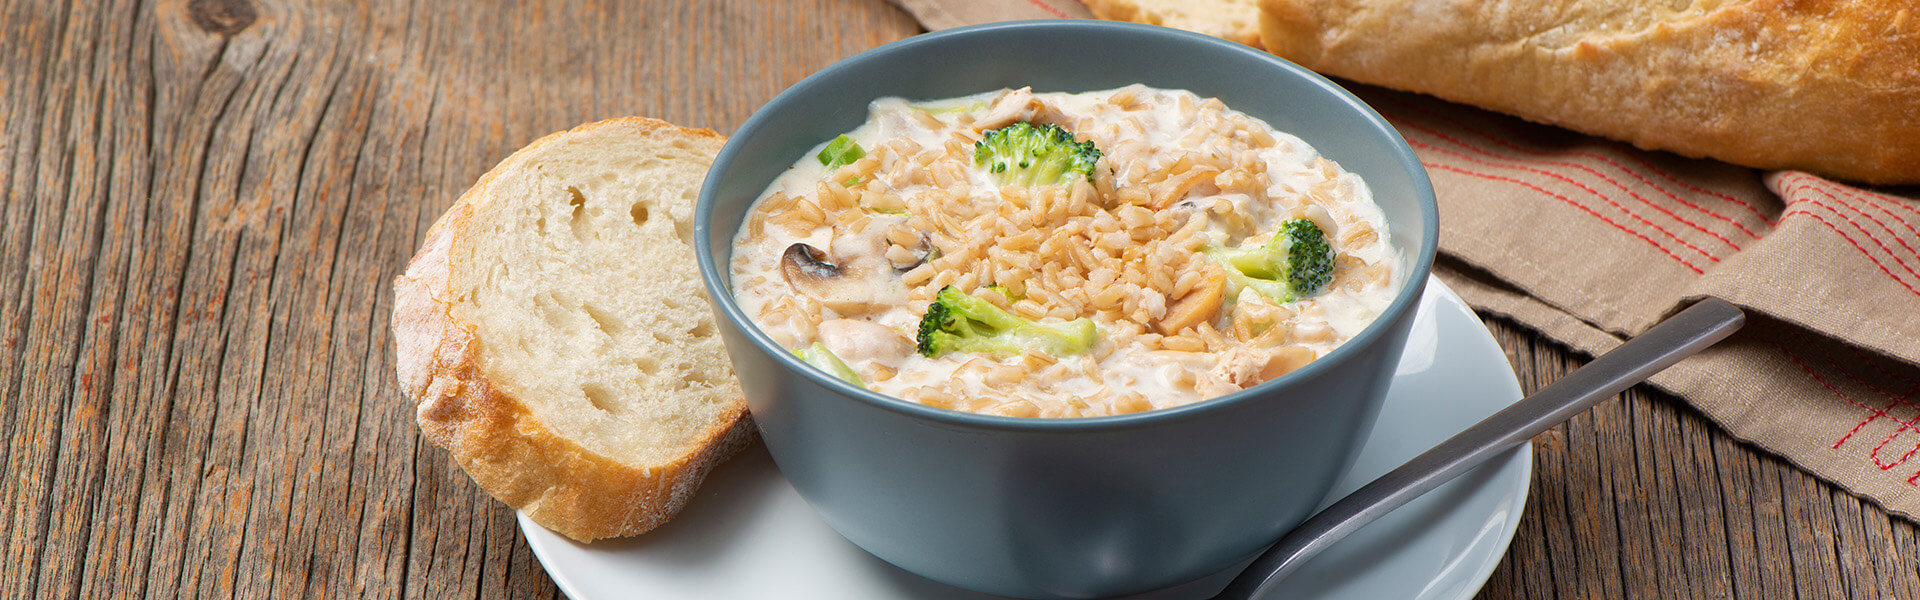 Chicken & Broccoli Brown Rice Soup